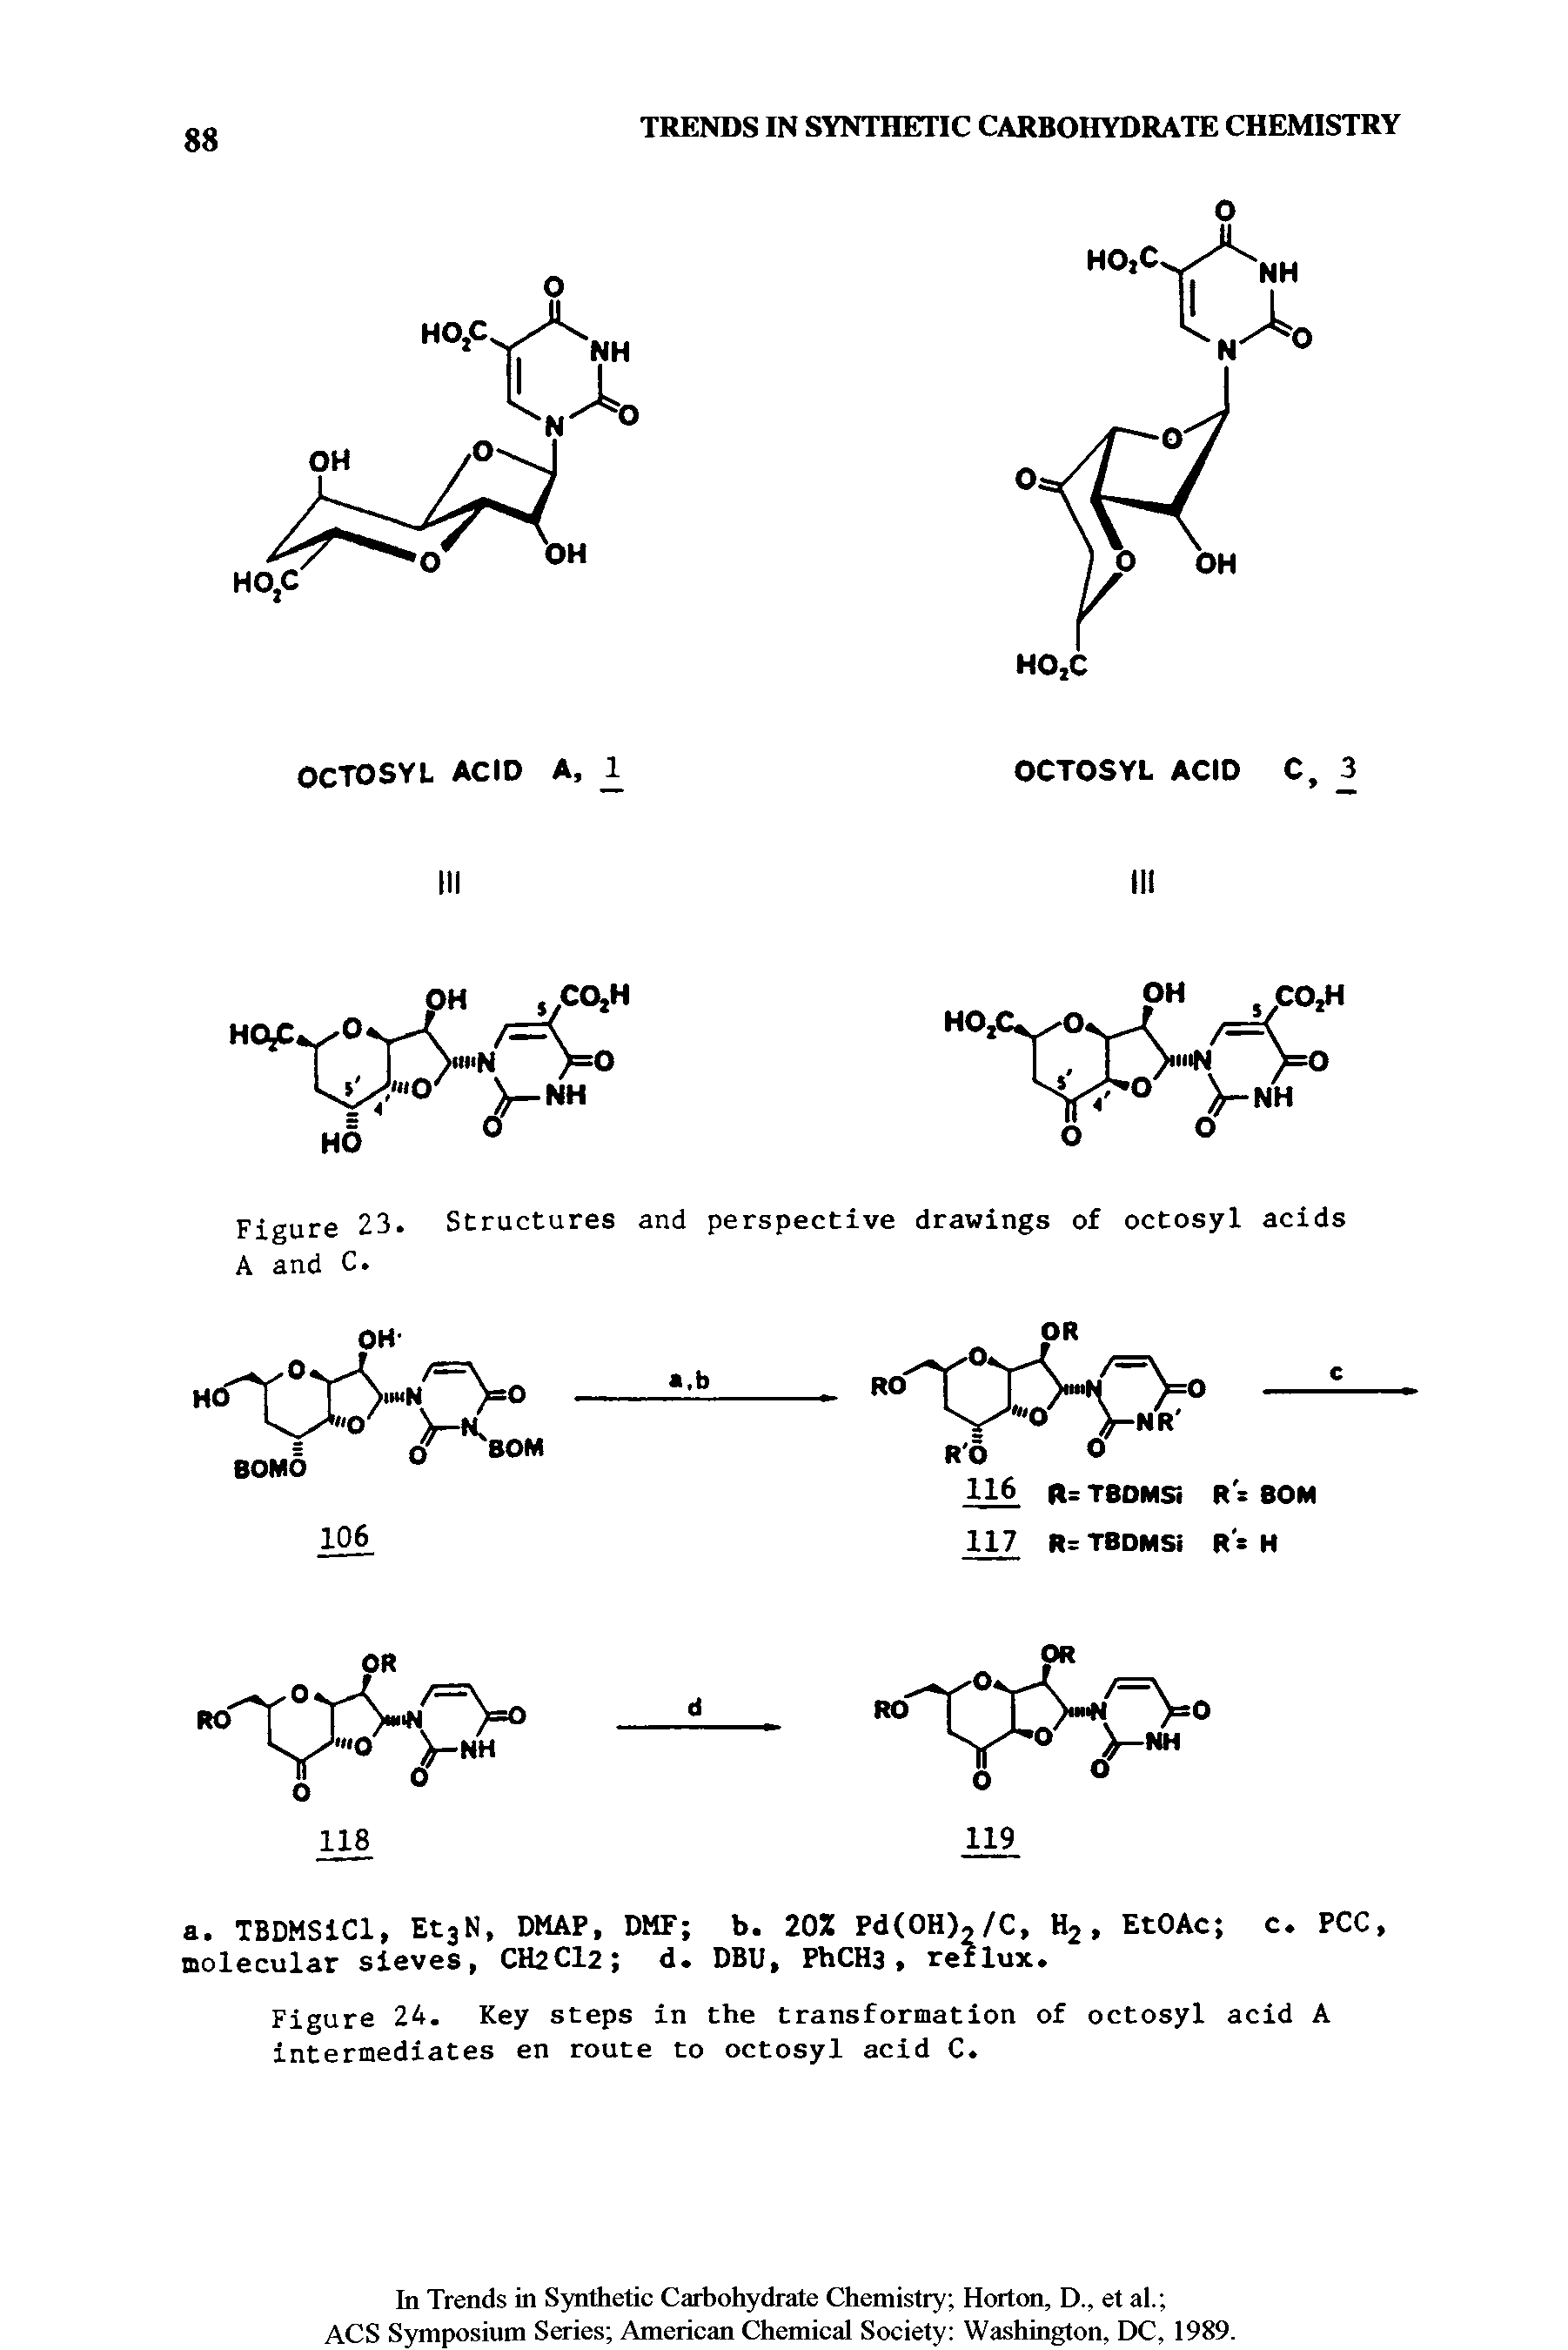 Figure 23. Structures and perspective drawings of octosyl acids A and C.